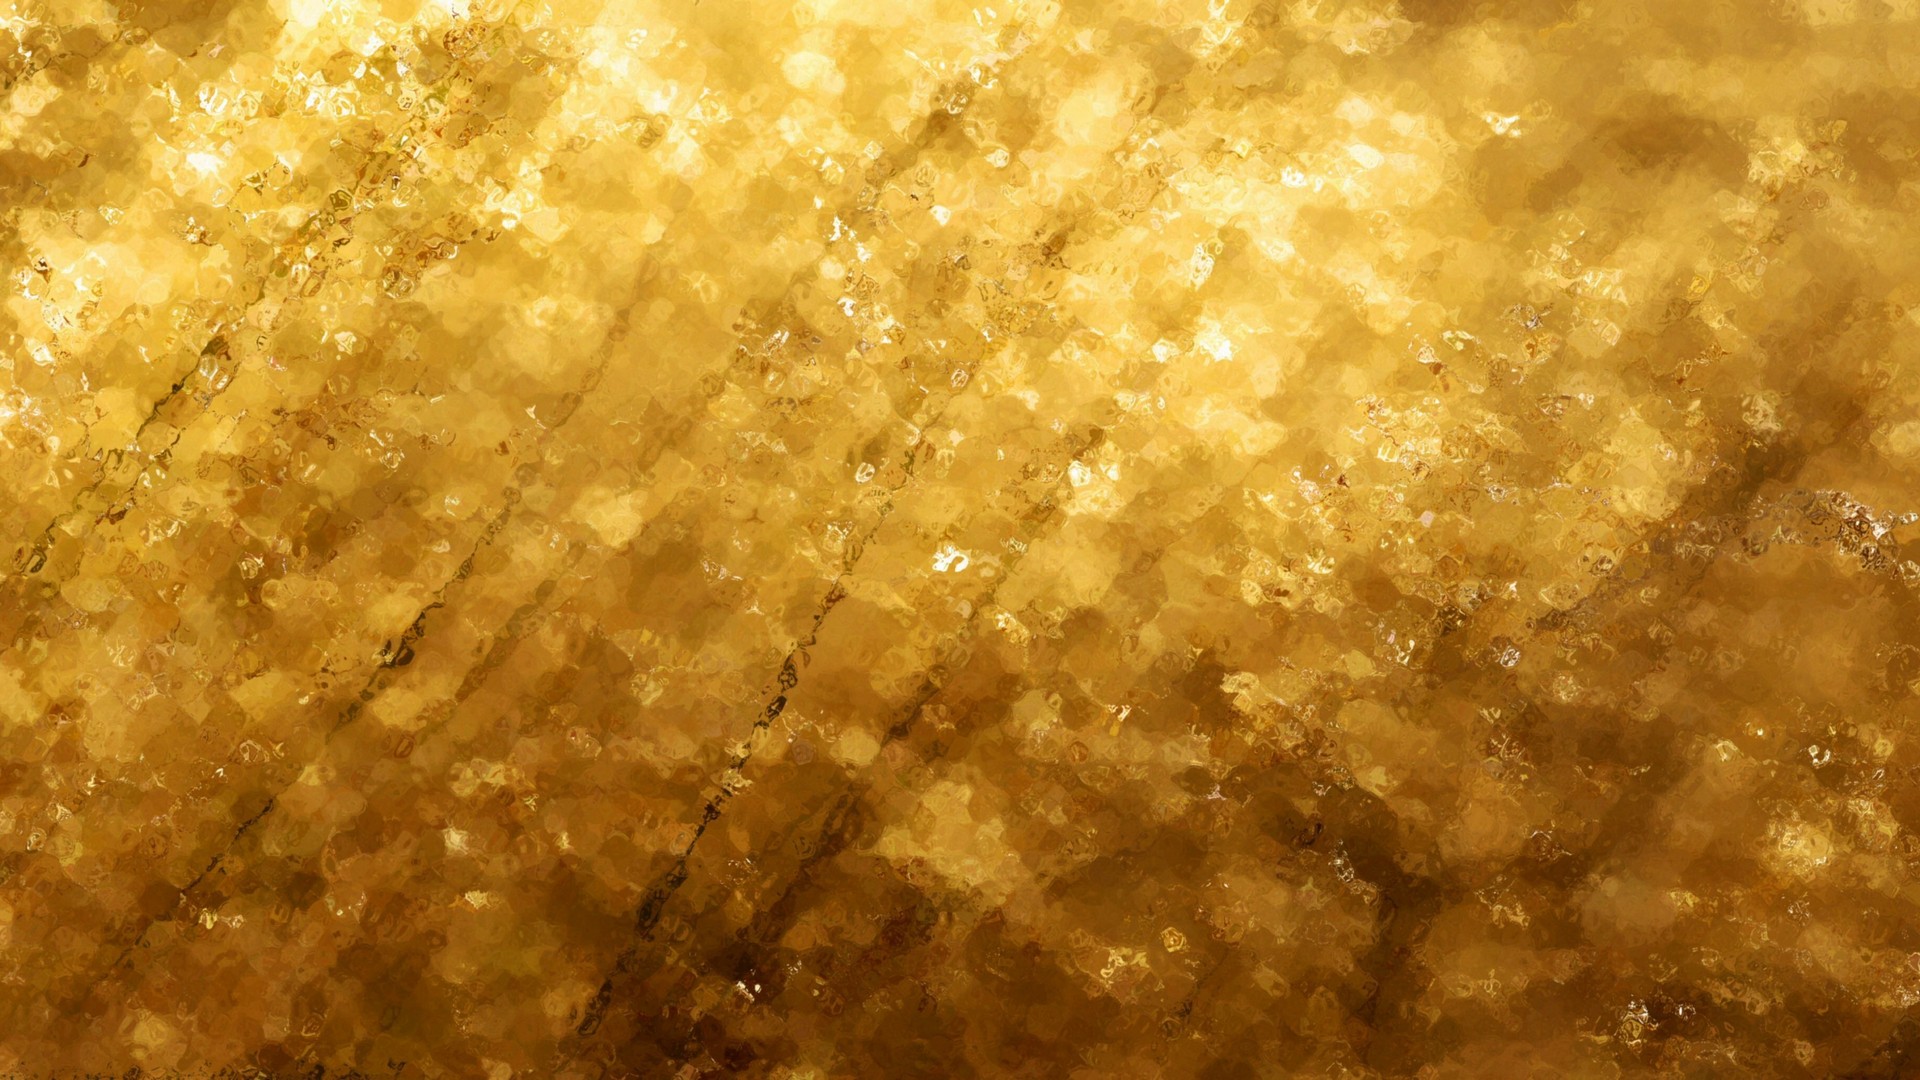 General 1920x1080 abstract texture yellow brown artwork